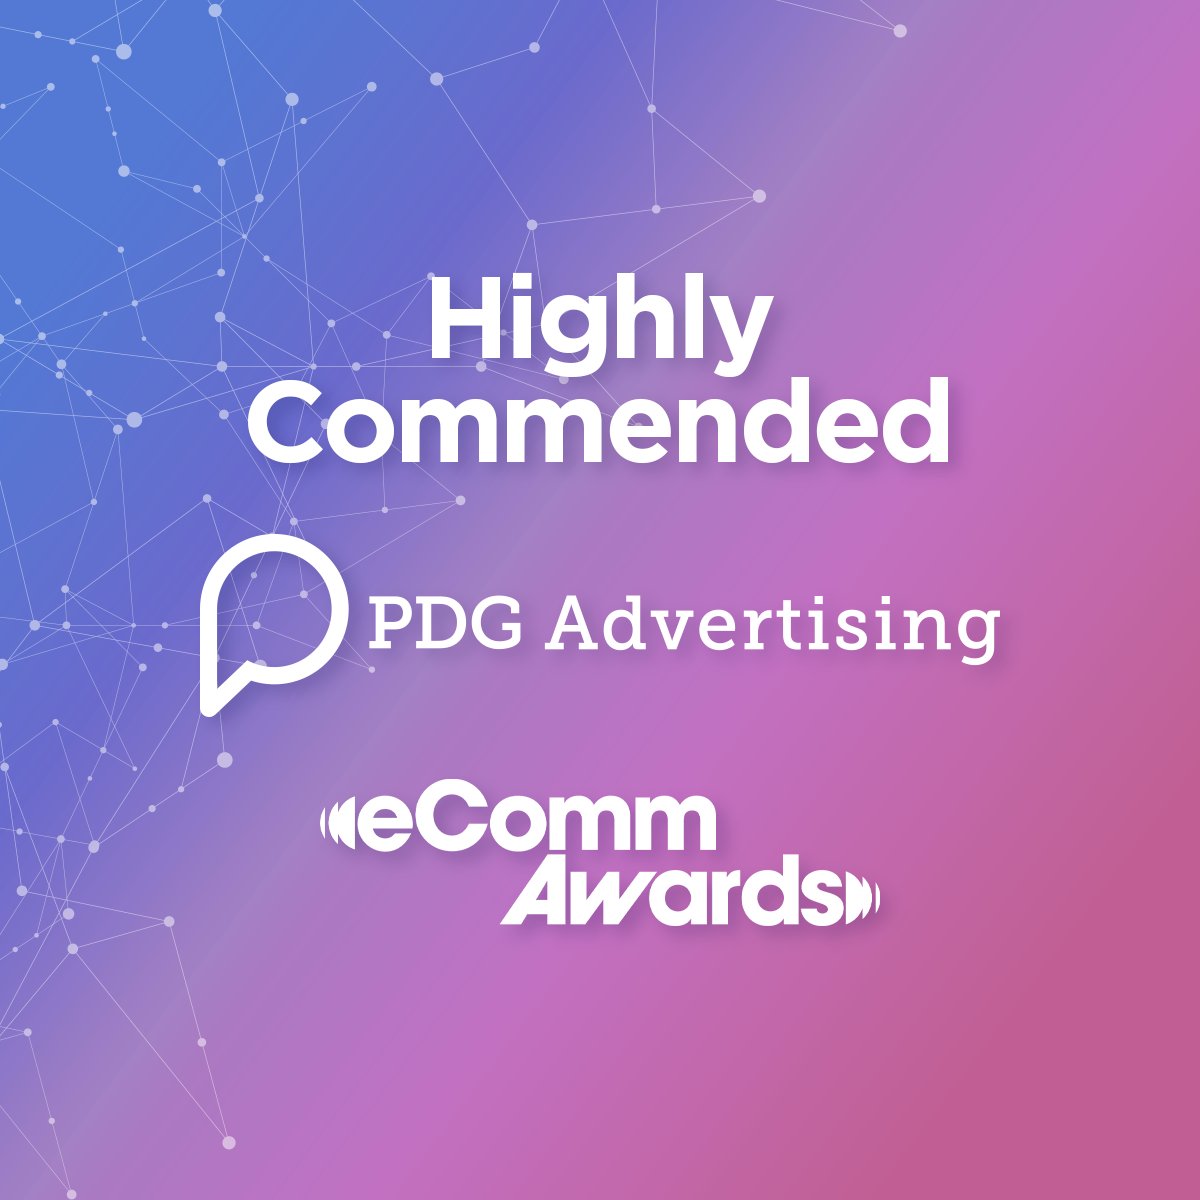 Proud moment! 🌟 PDG Advertising has been named 'Highly Commended' at the Irish eCommerce Awards for the eCommerce Search Campaign Of The Year. Kudos to the winner and finalists! 🎉 #IrishEcommerceAwards #PDGHighlight